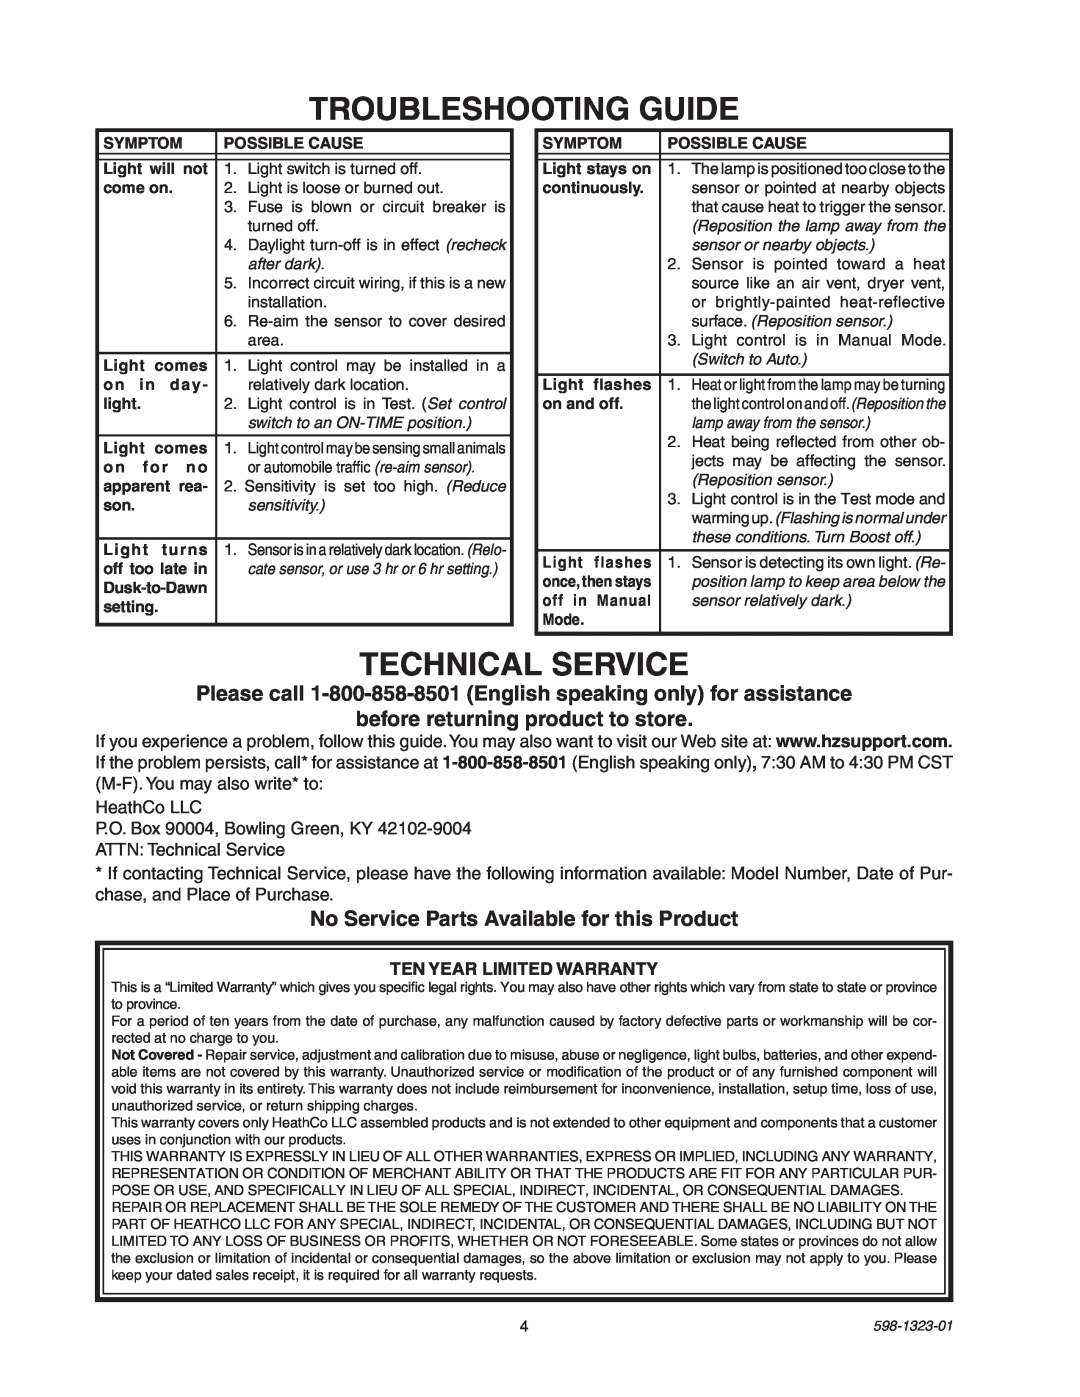 Heath Zenith 5310 Troubleshooting Guide, Technical Service, before returning product to store, Ten Year Limited Warranty 